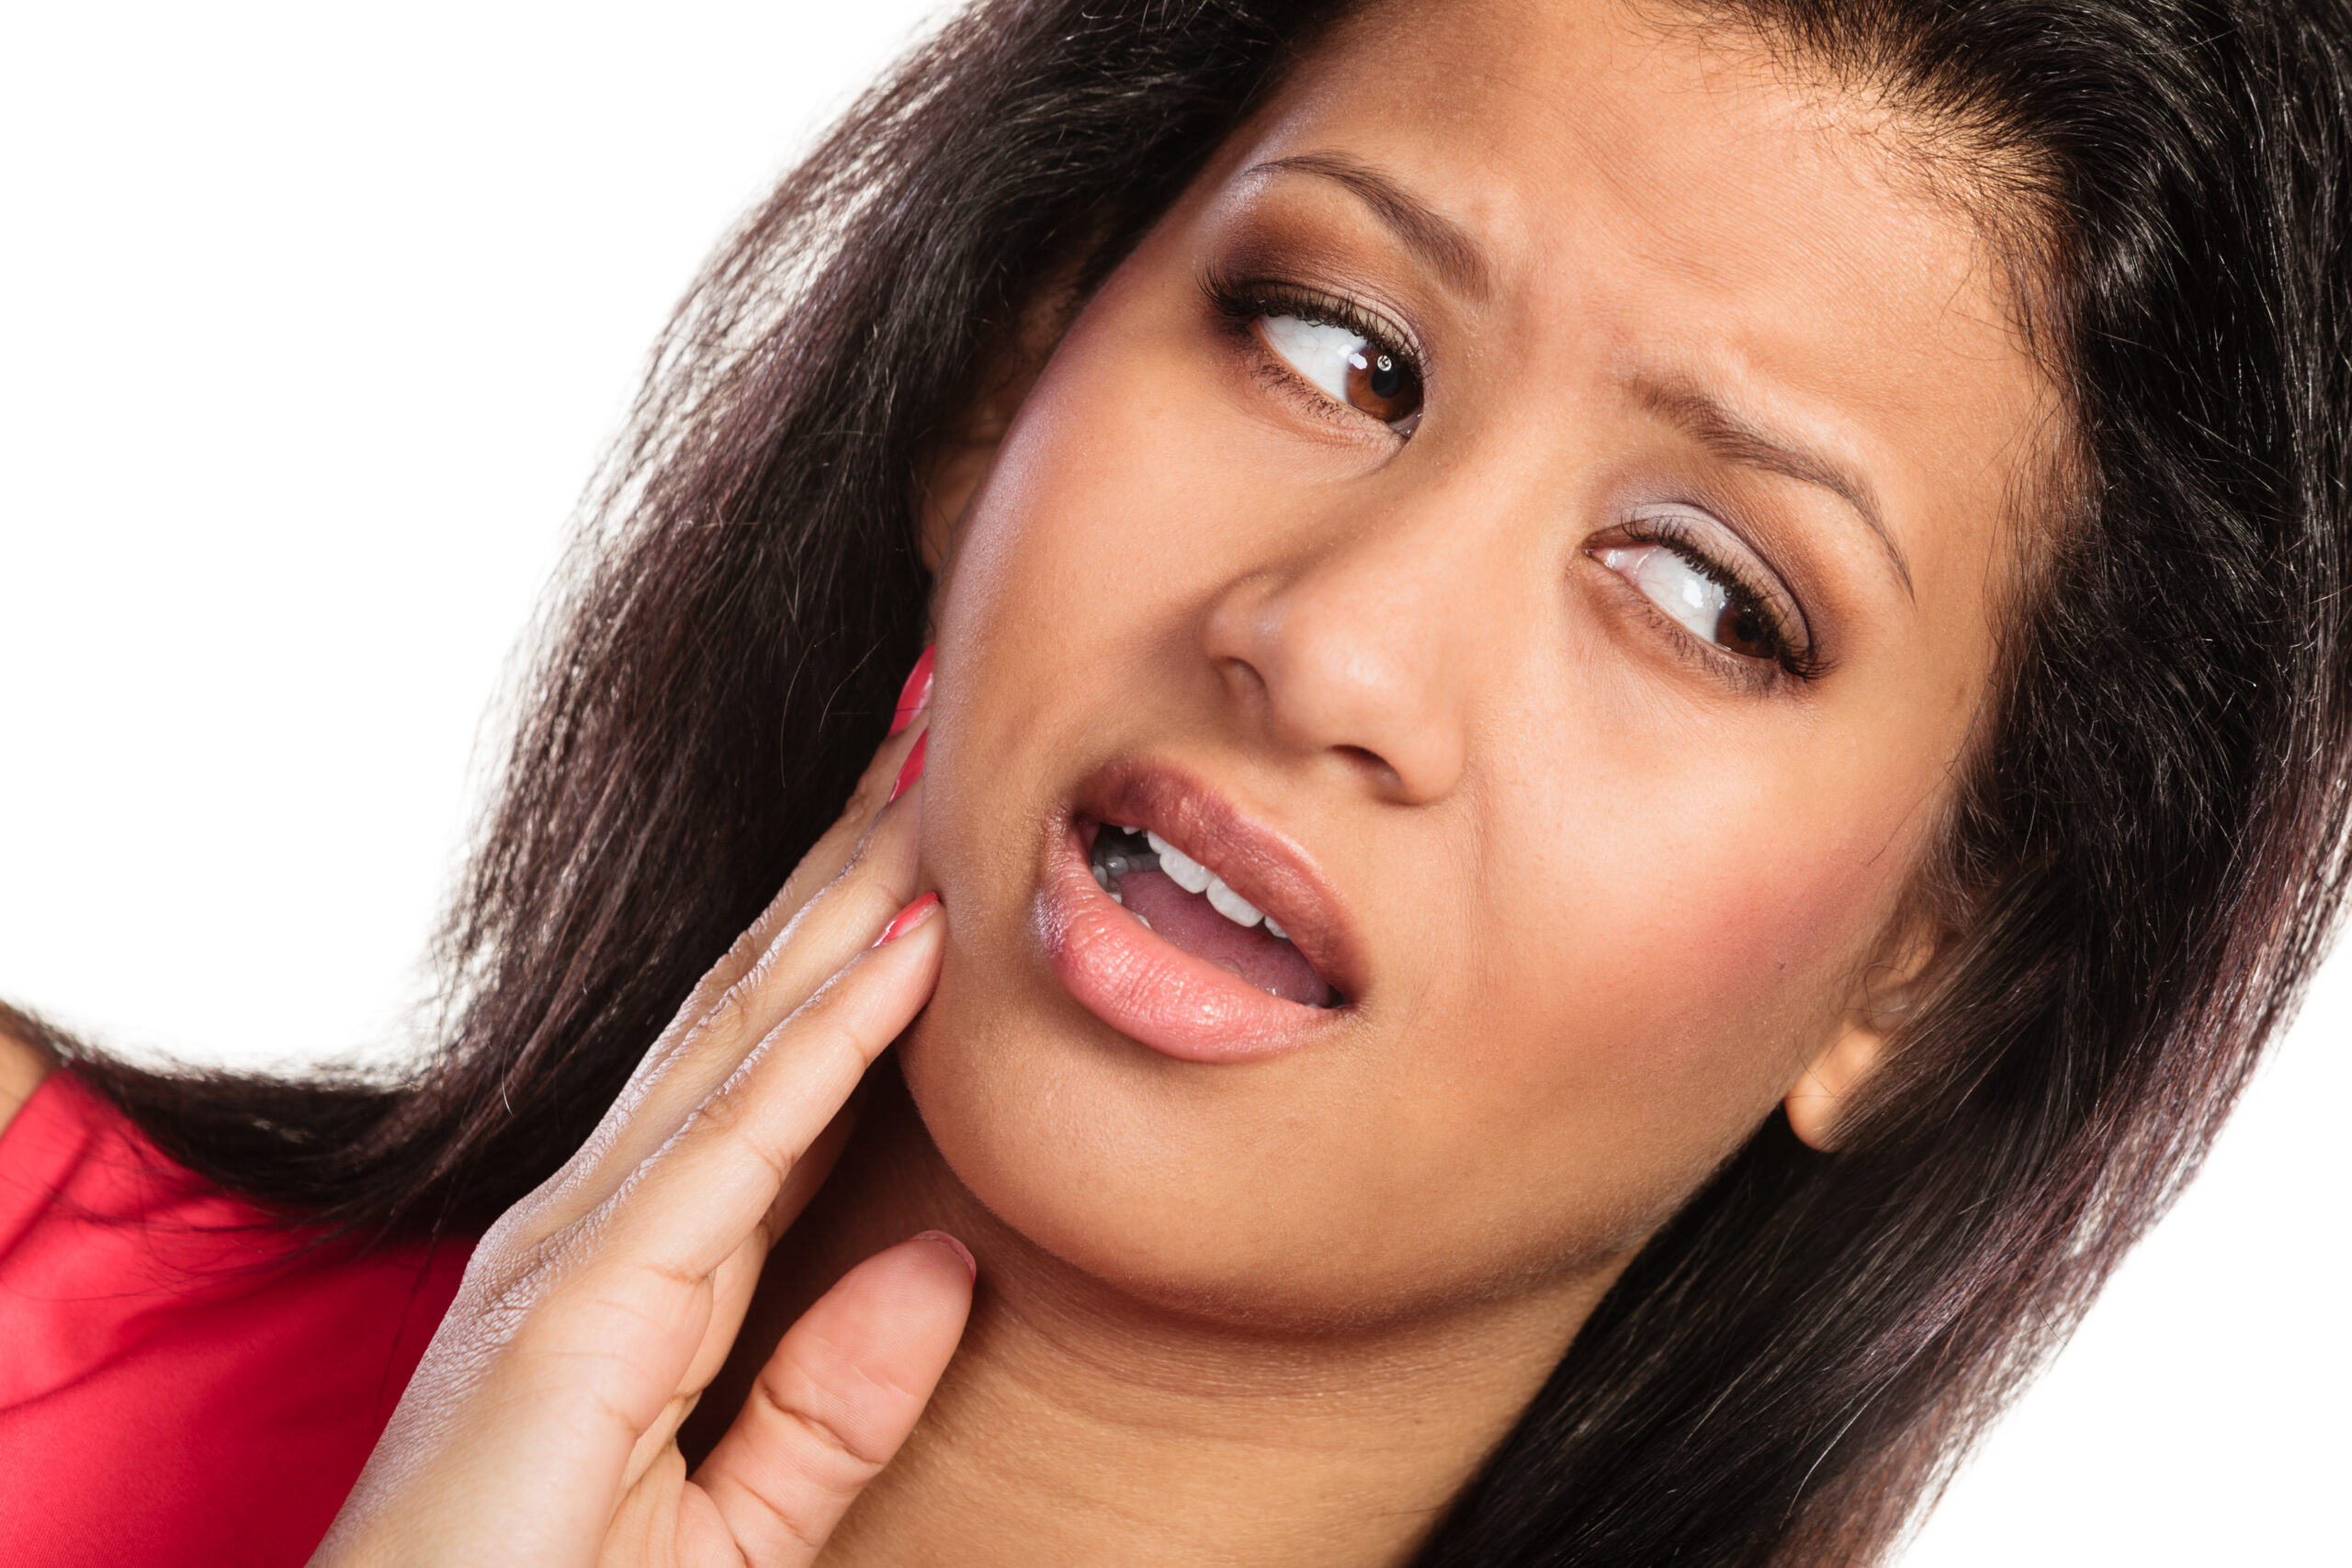 Jaw Pain? Clicking? What to know about TMJ Disorders